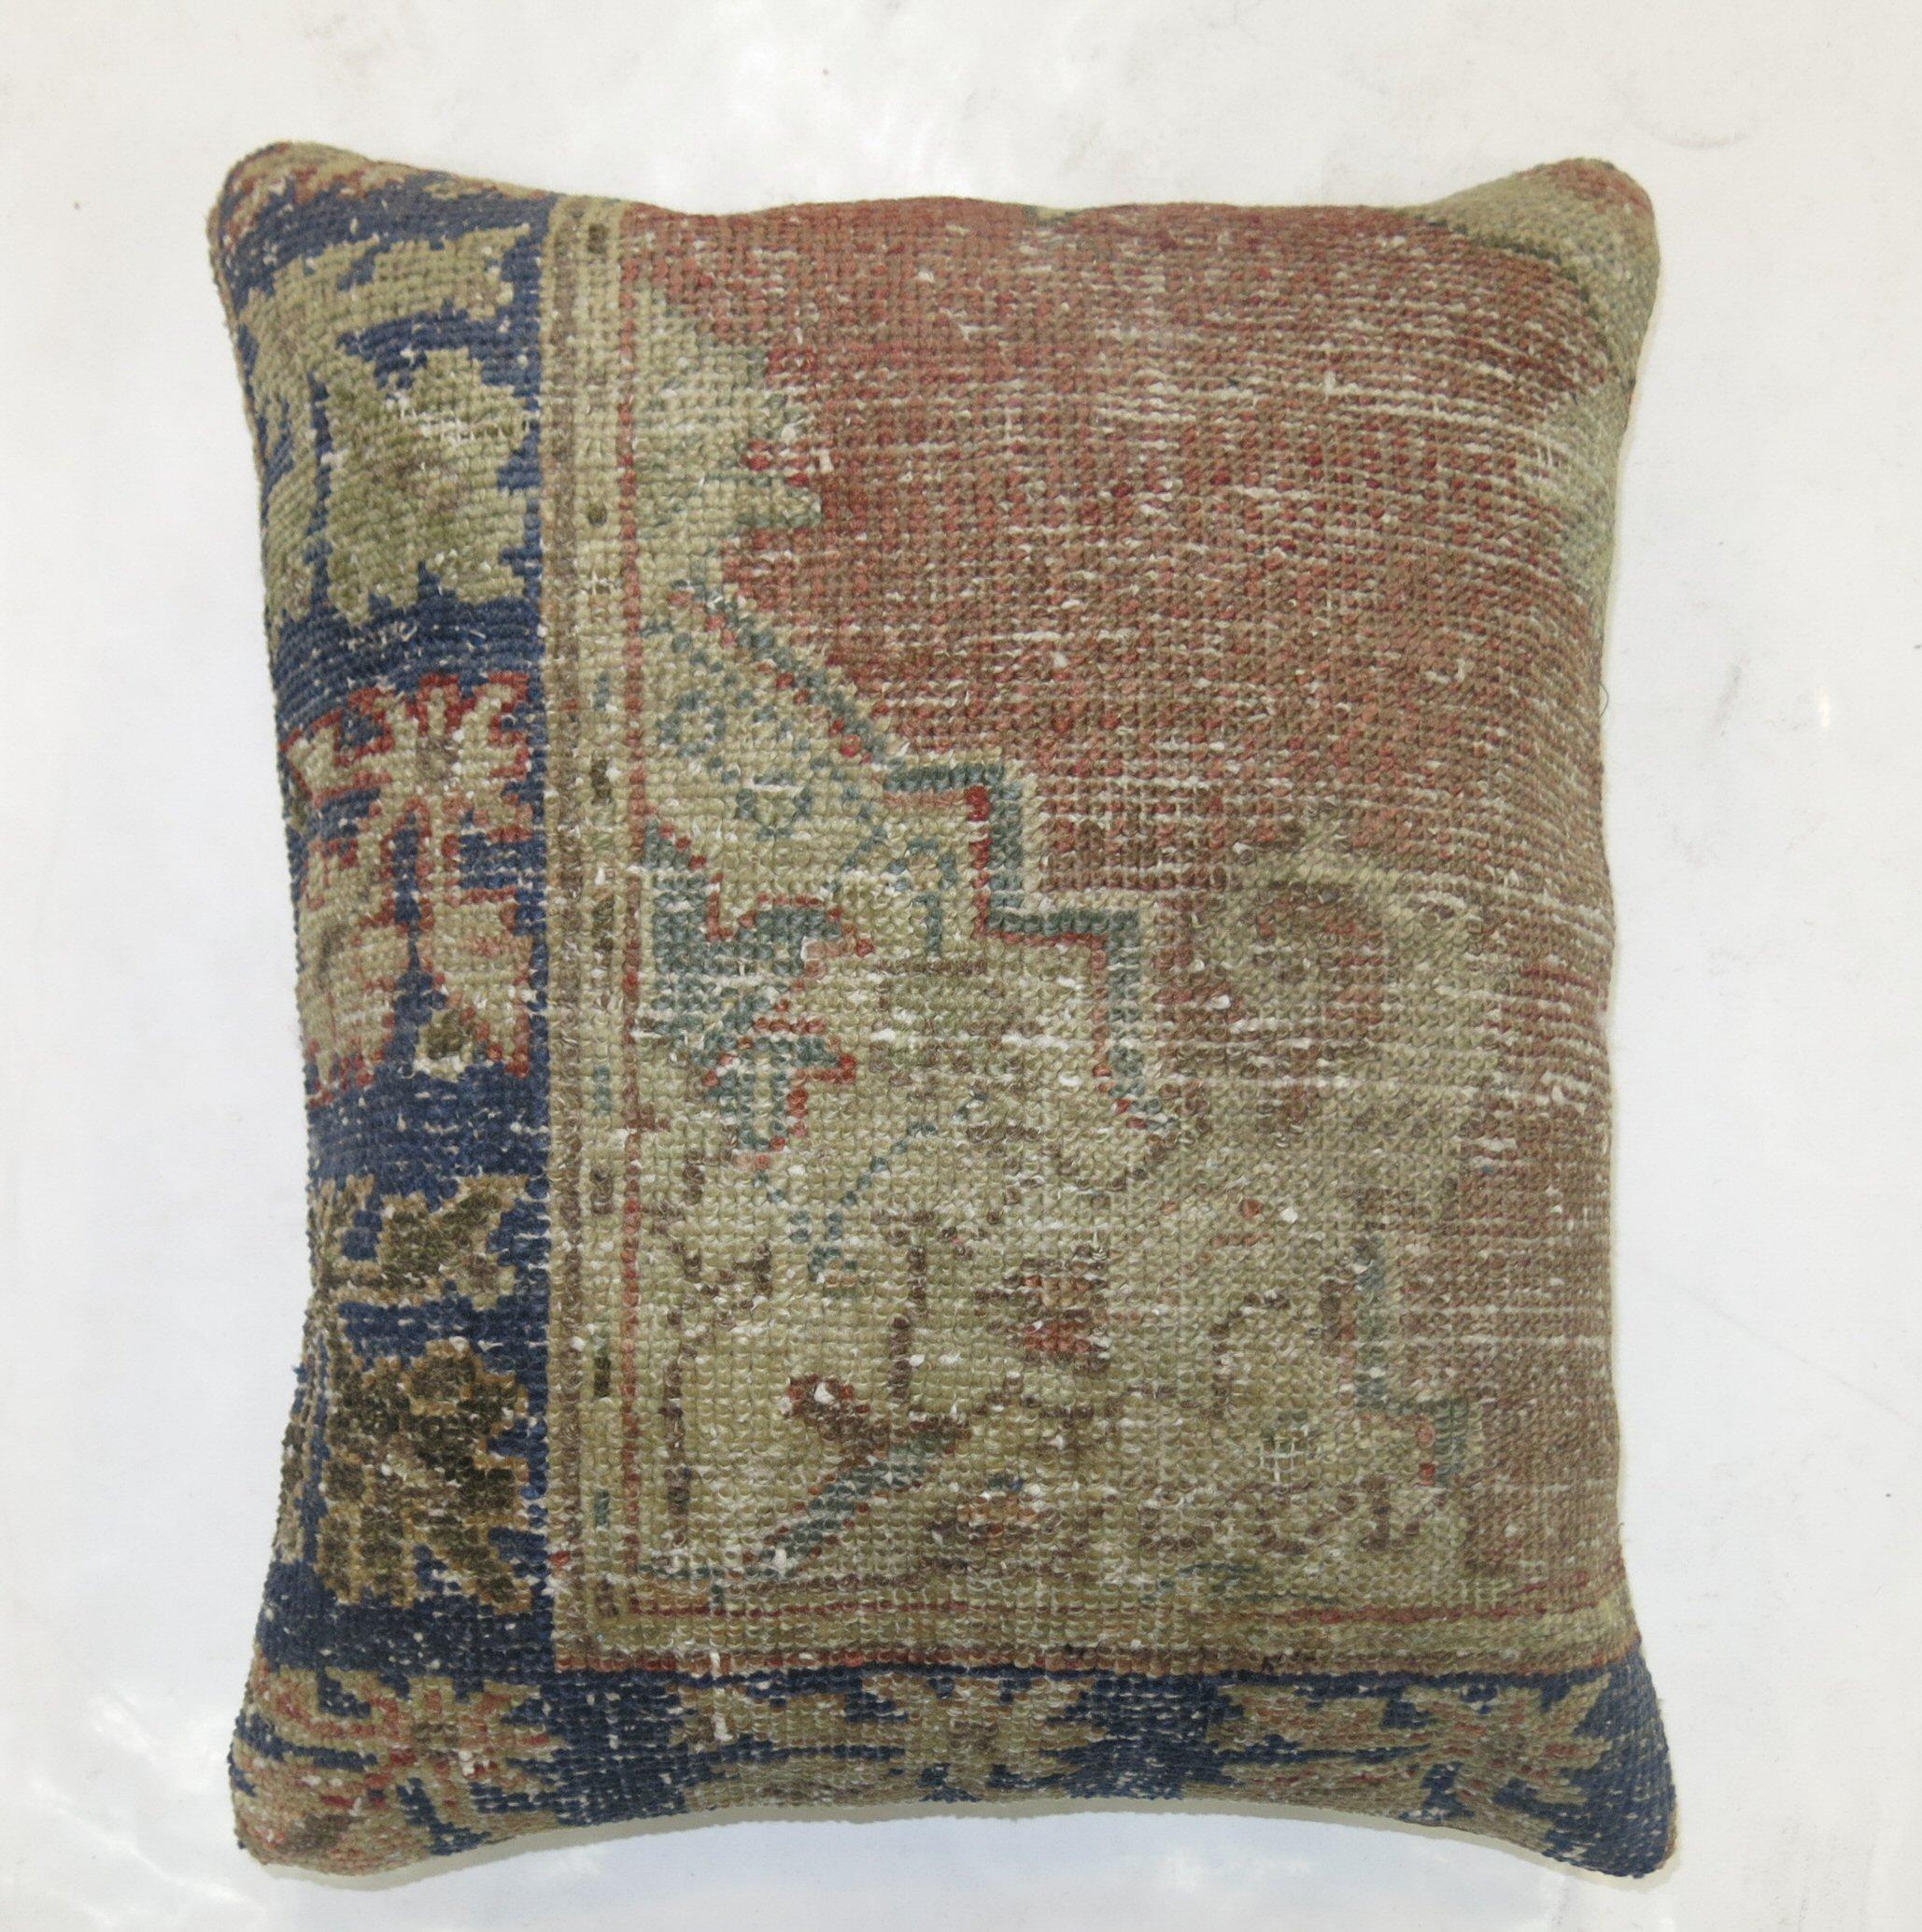 Pillow made from an old early 20th-century turkish oushak rug

Measures: 1'7'' x 1'10''